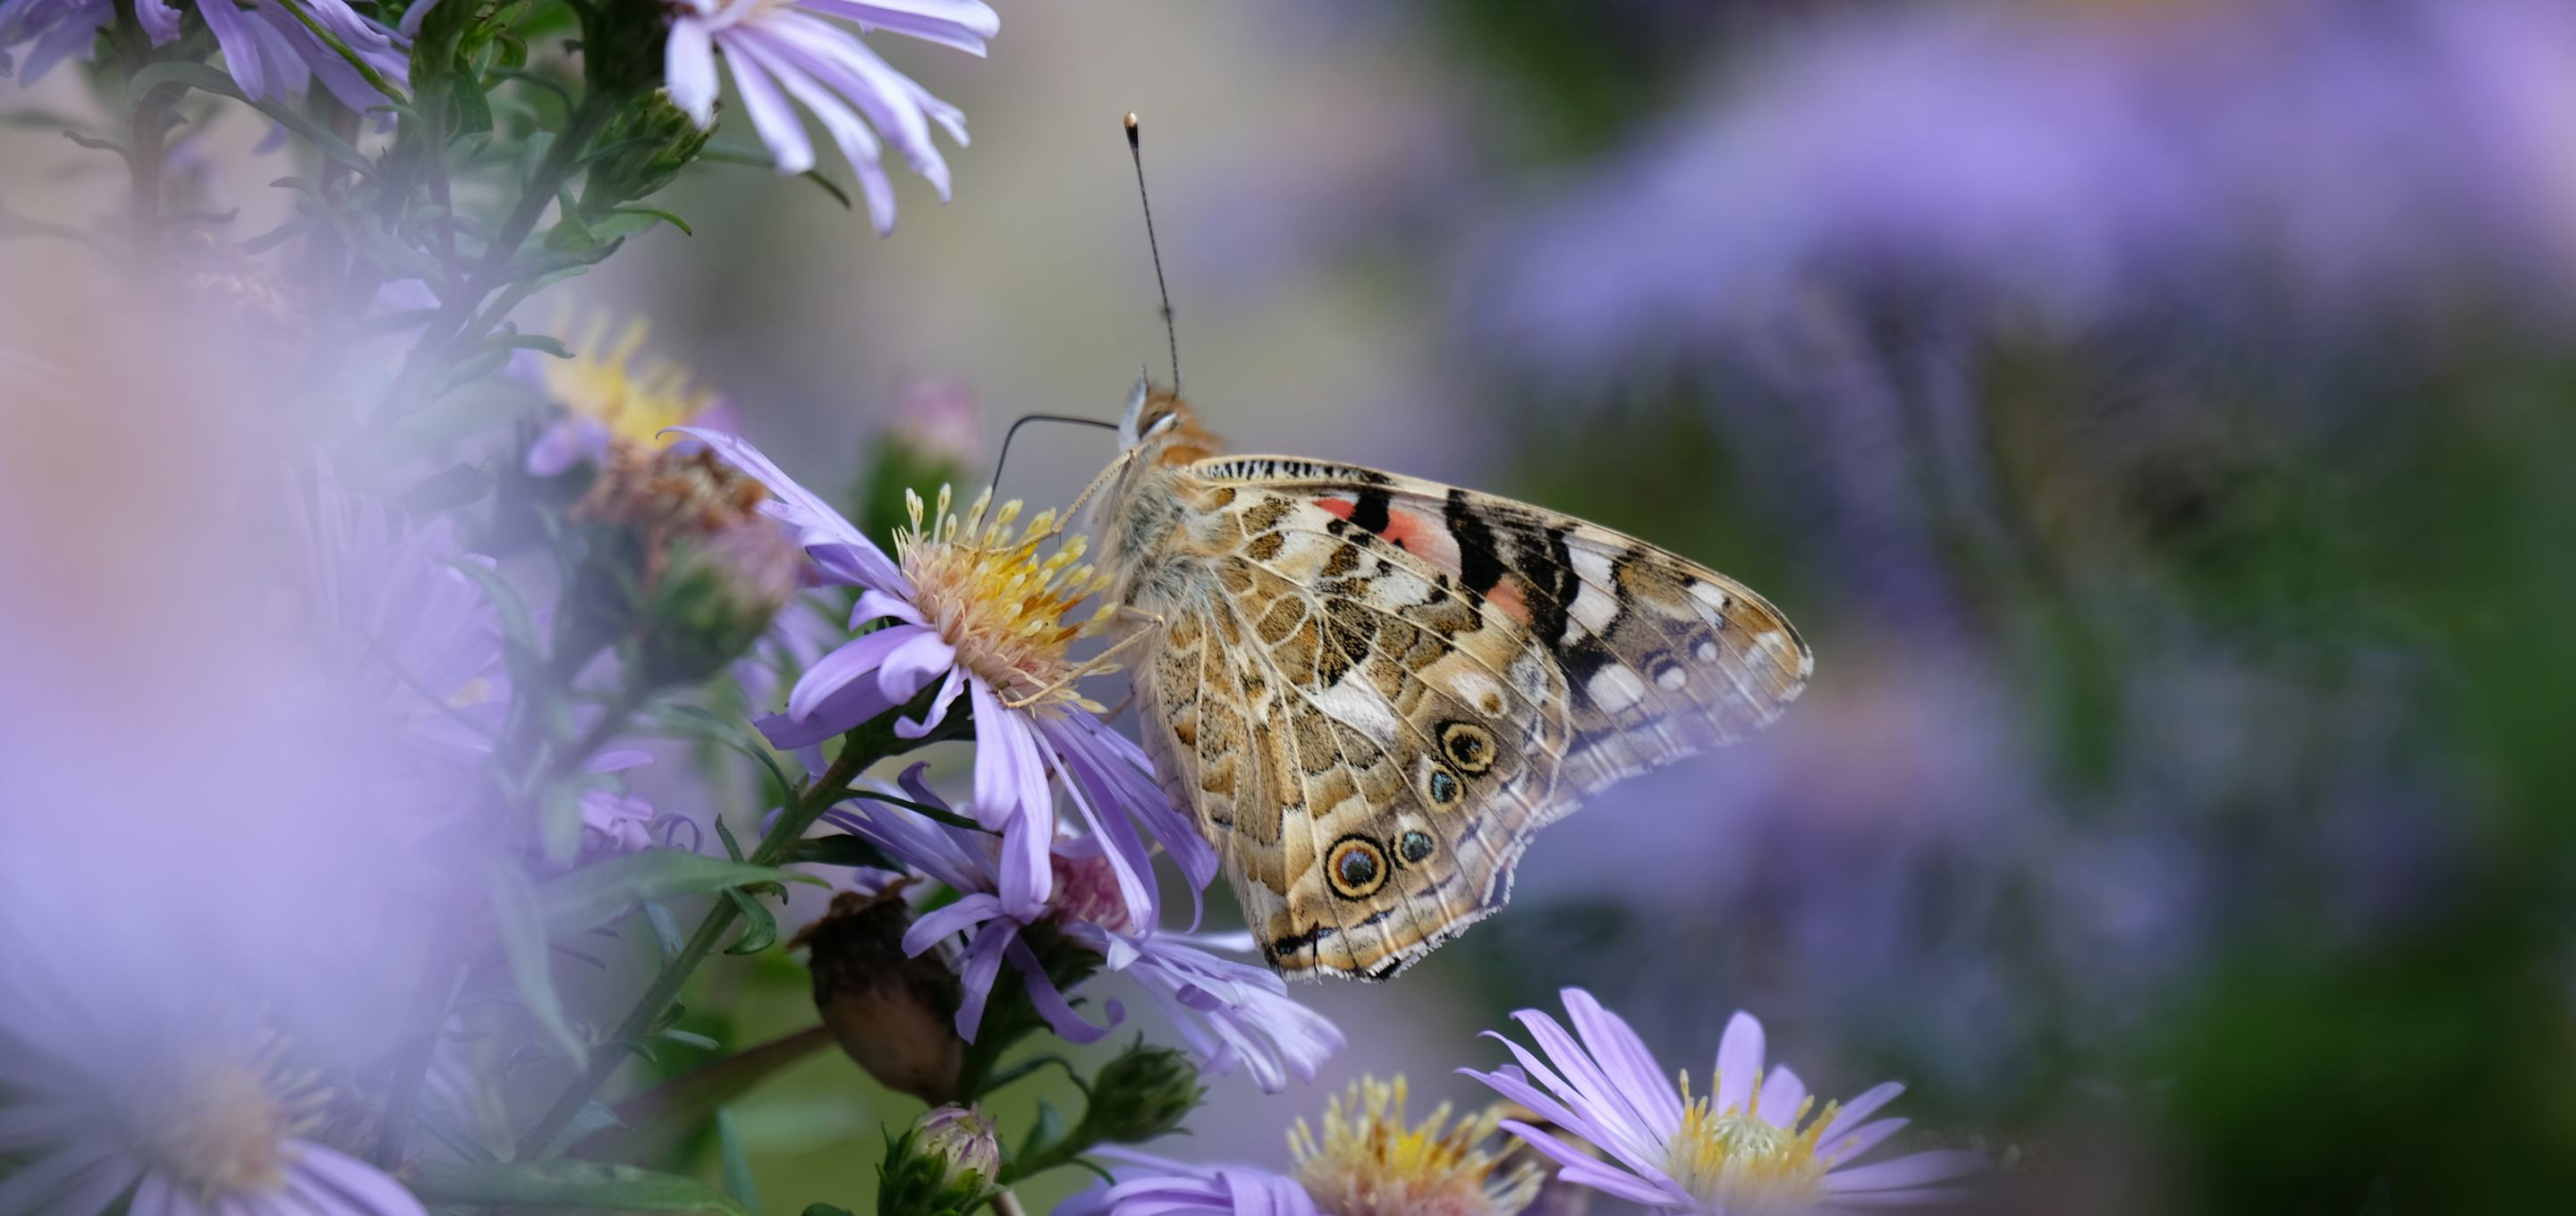 A Painted Lady butterfly standing on purple Asters